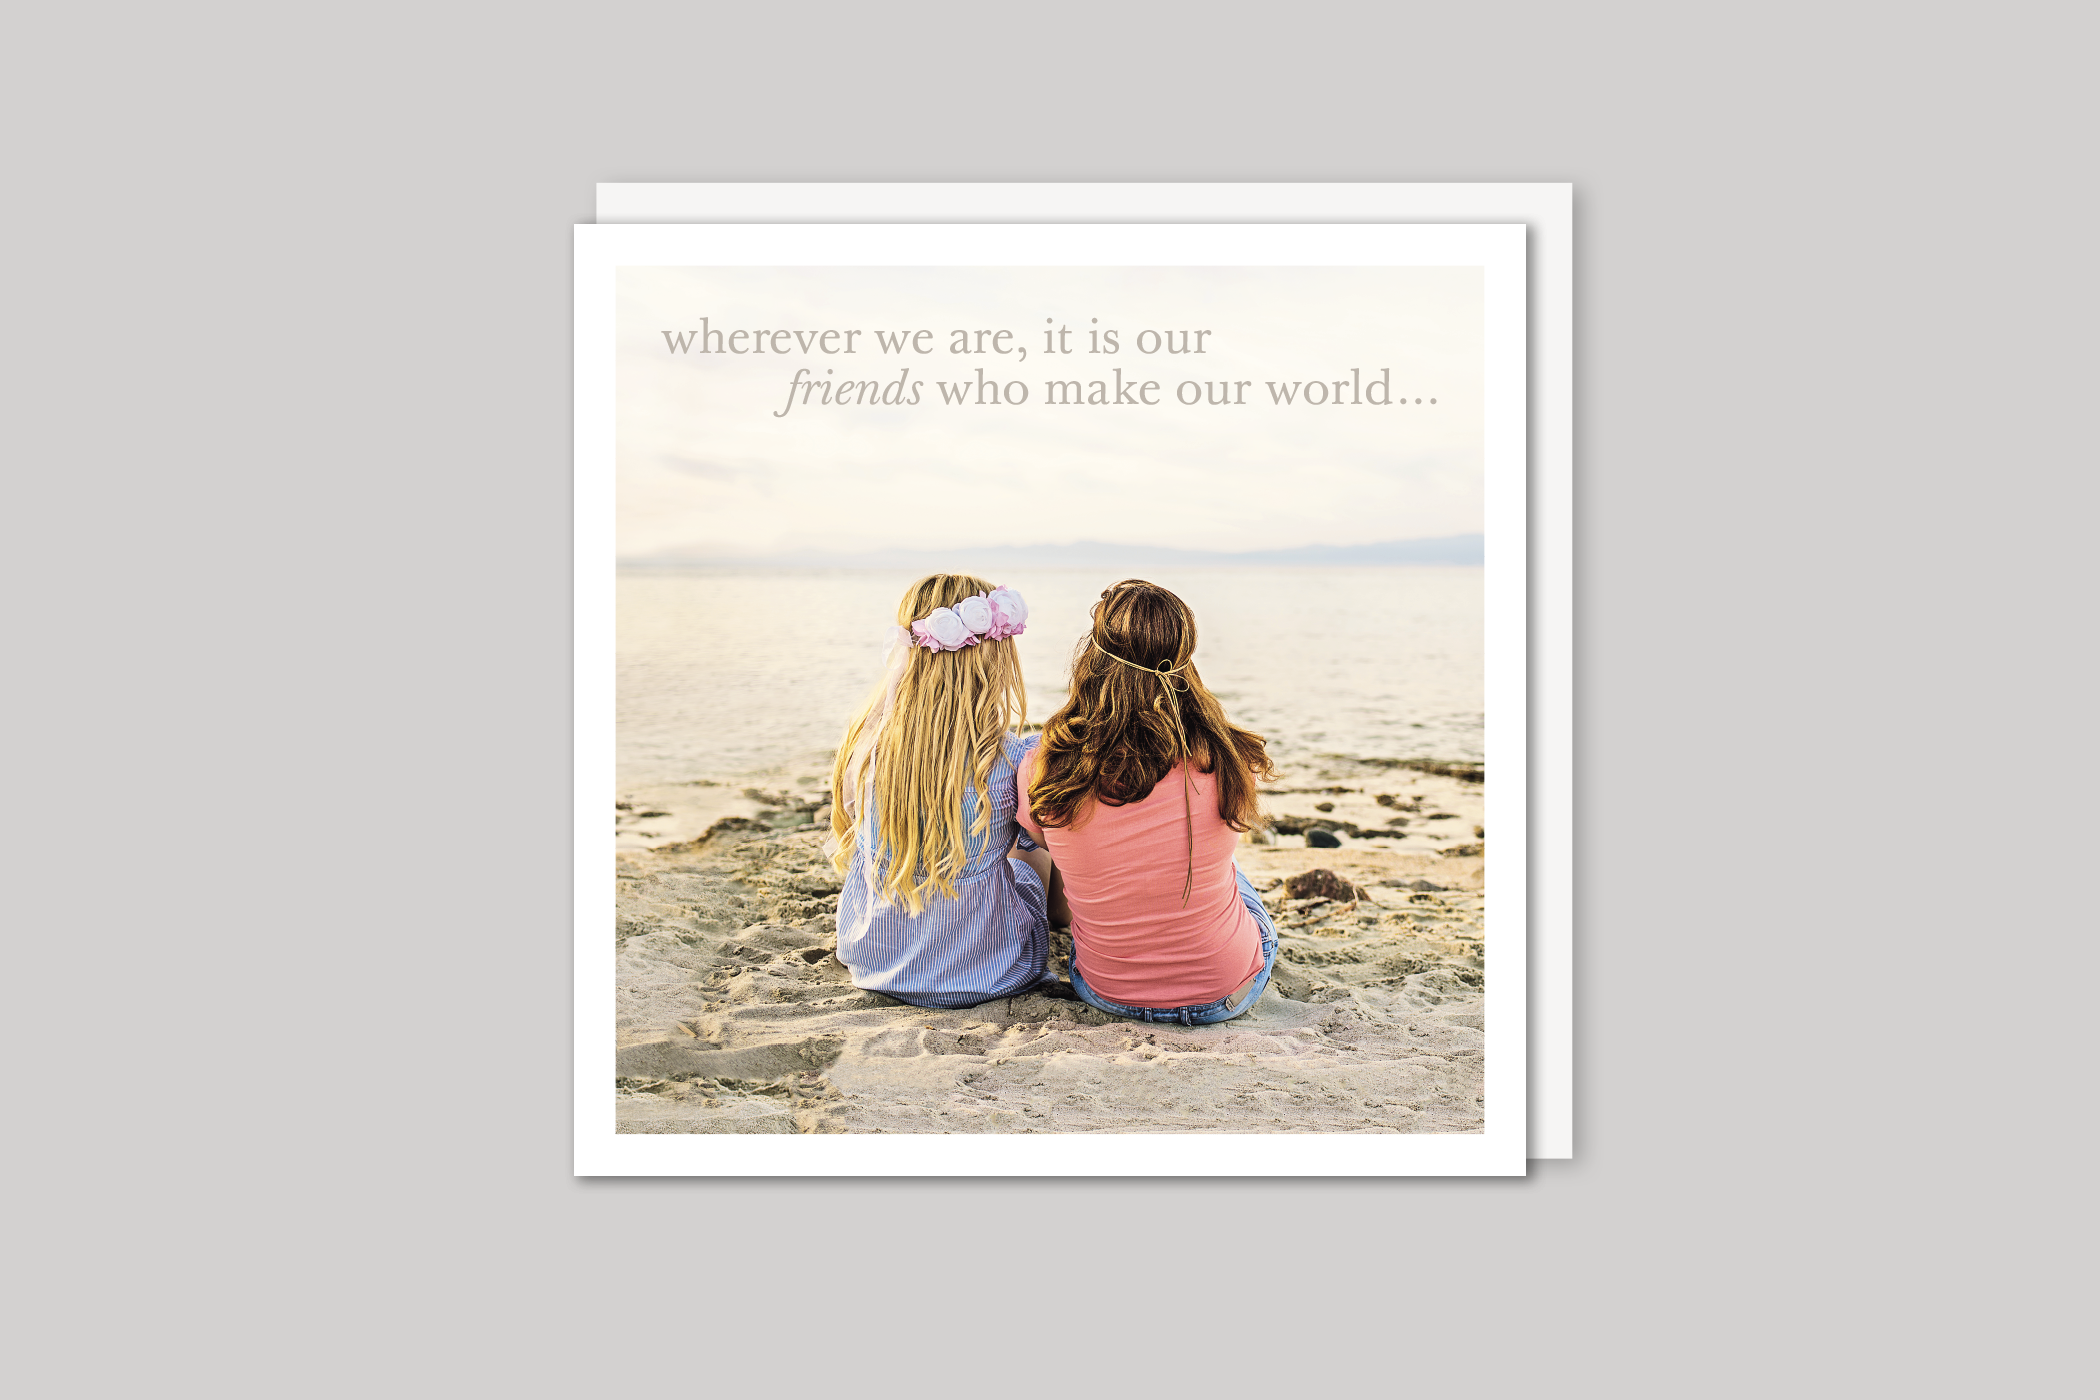 Wherever We Are from Every Picture range of greeting cards  by Icon, back page.